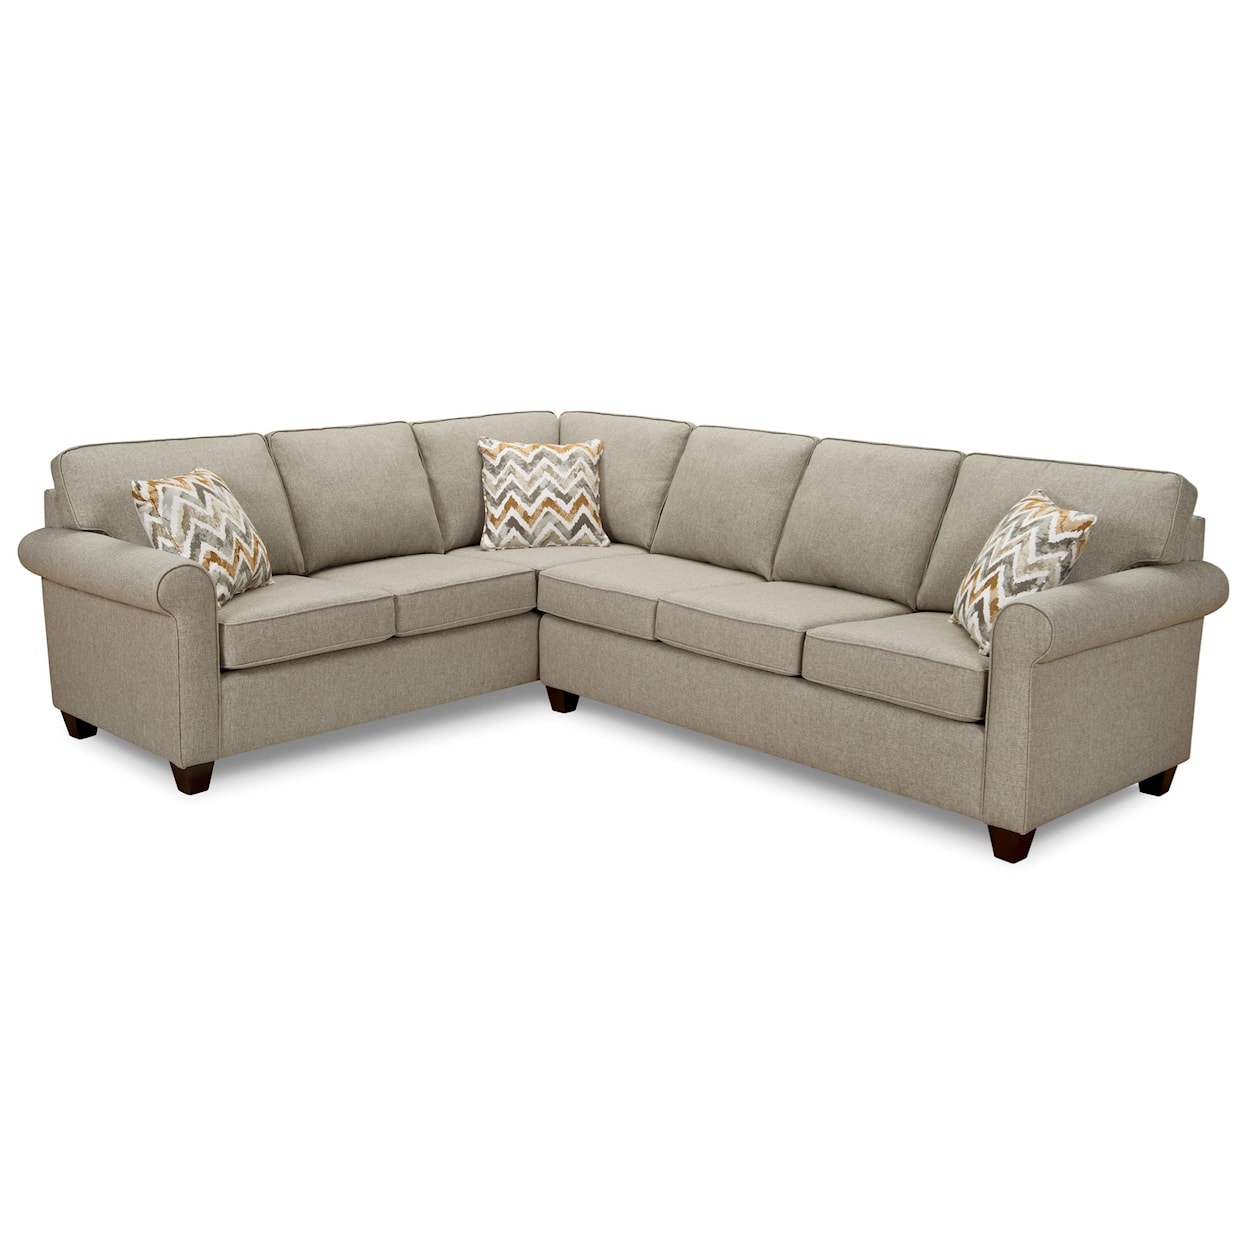 Superstyle 9701 Sectional Sofa